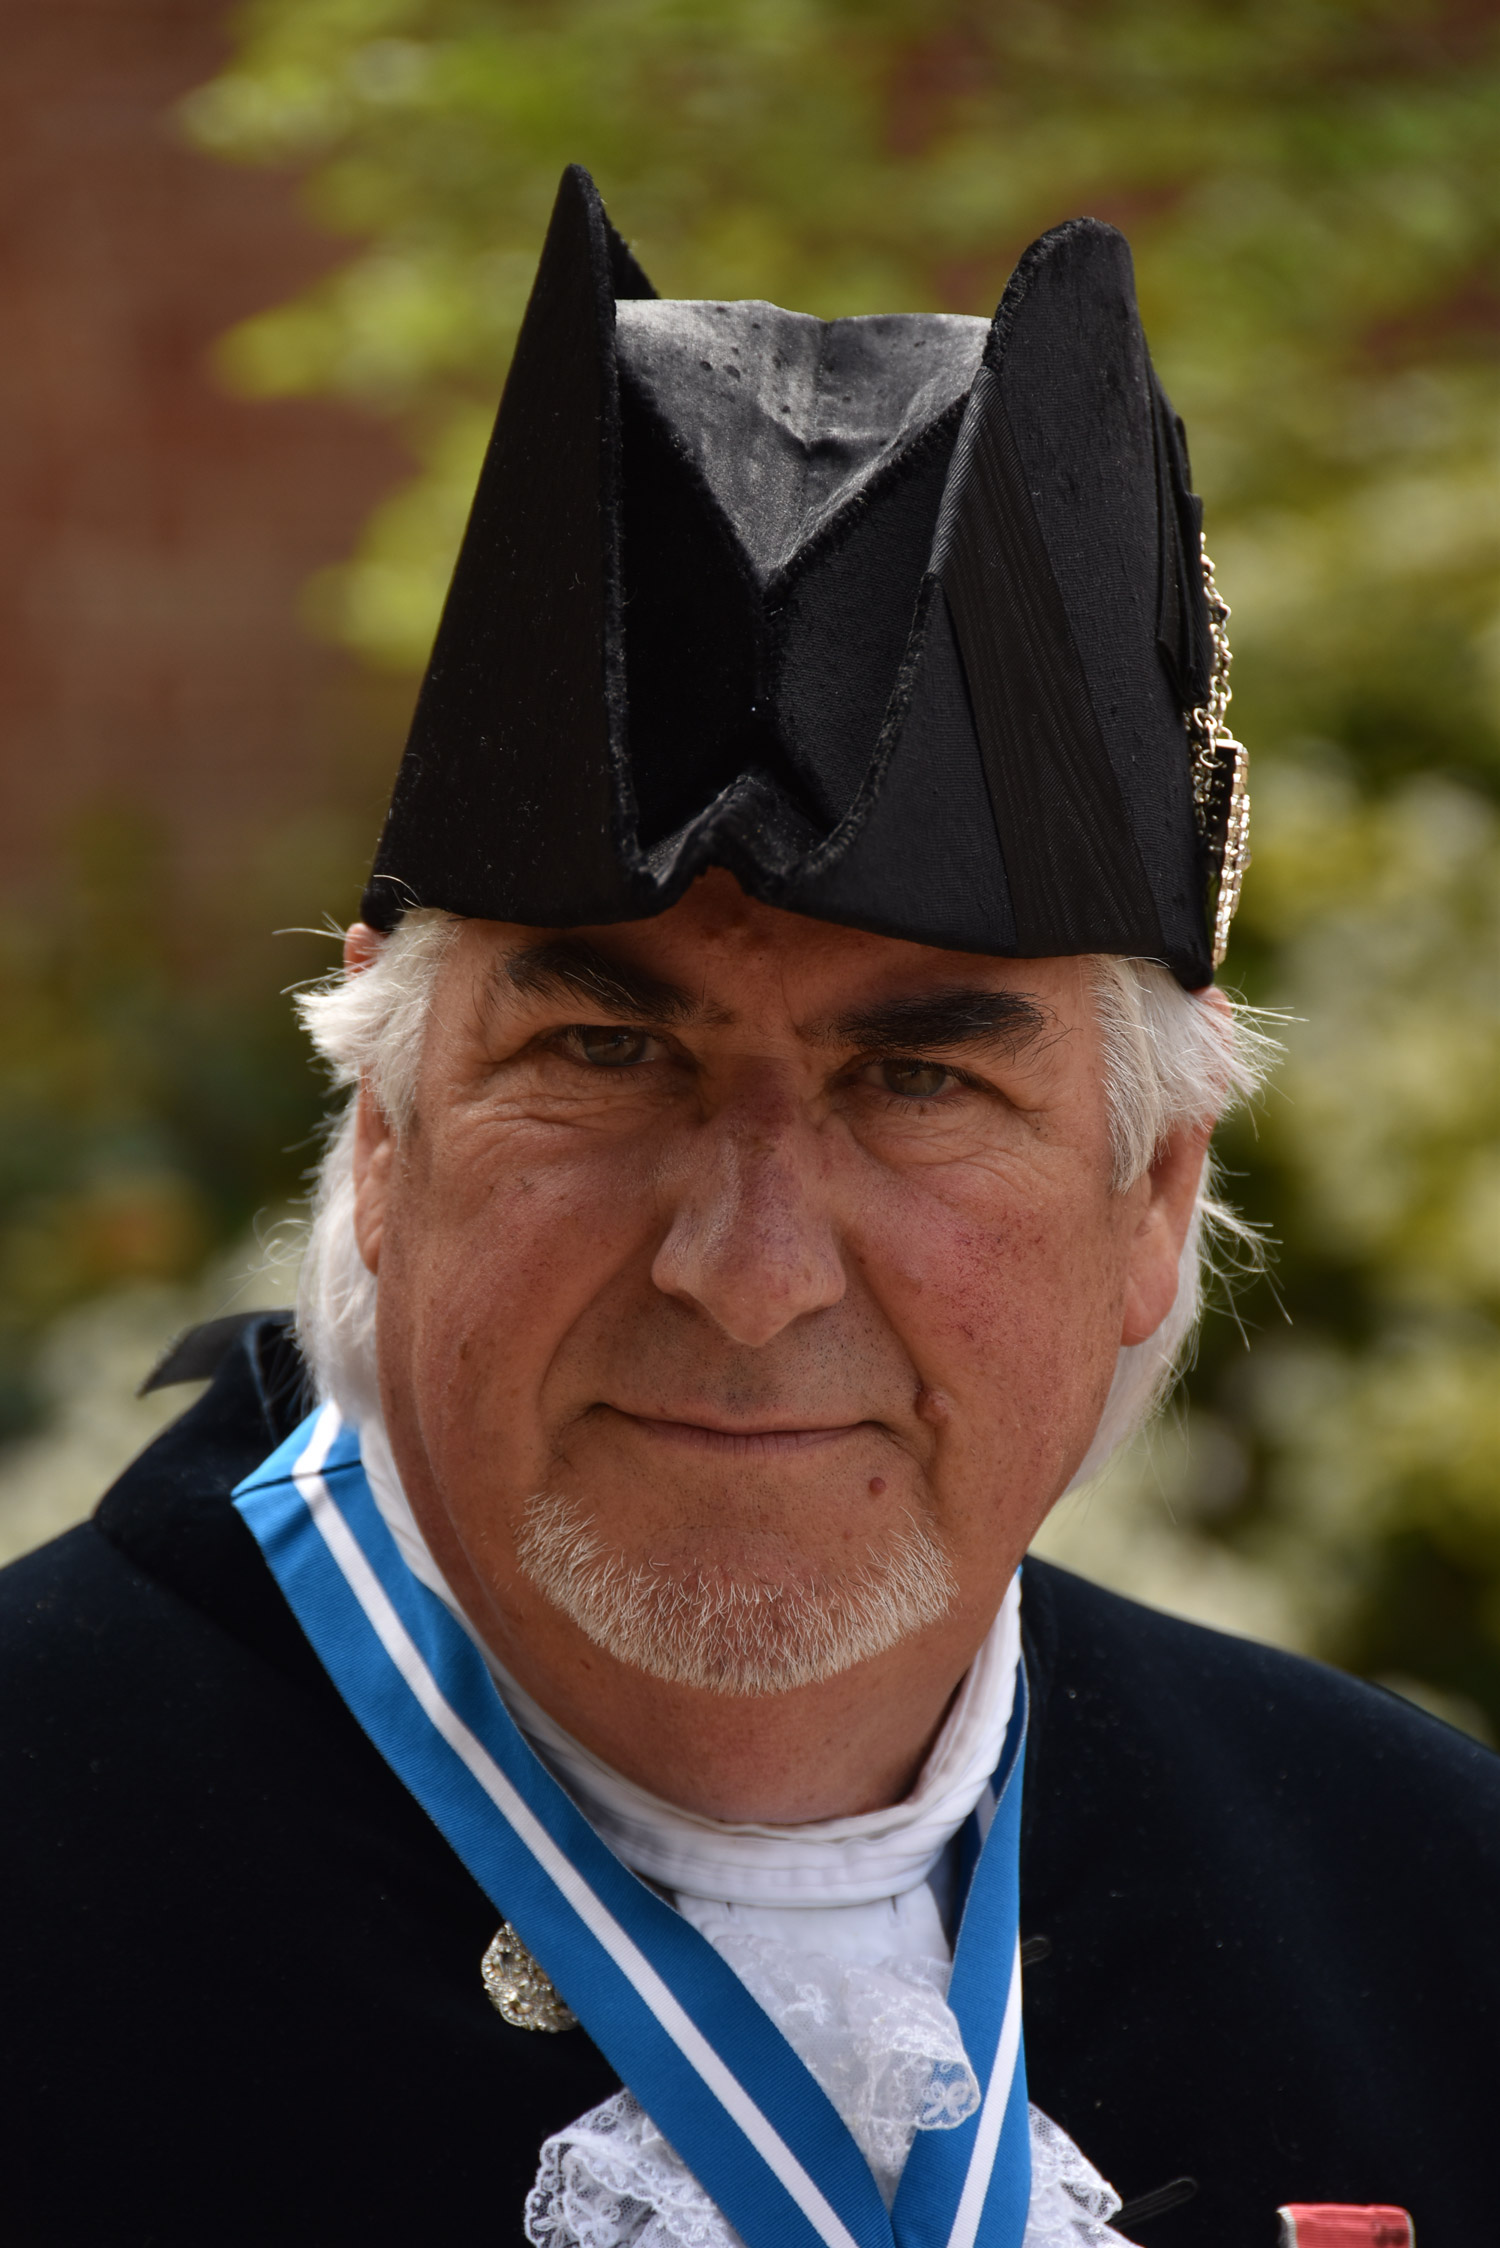 A photo of Dennis Dunn - High Sheriff of Cheshire 2023/24